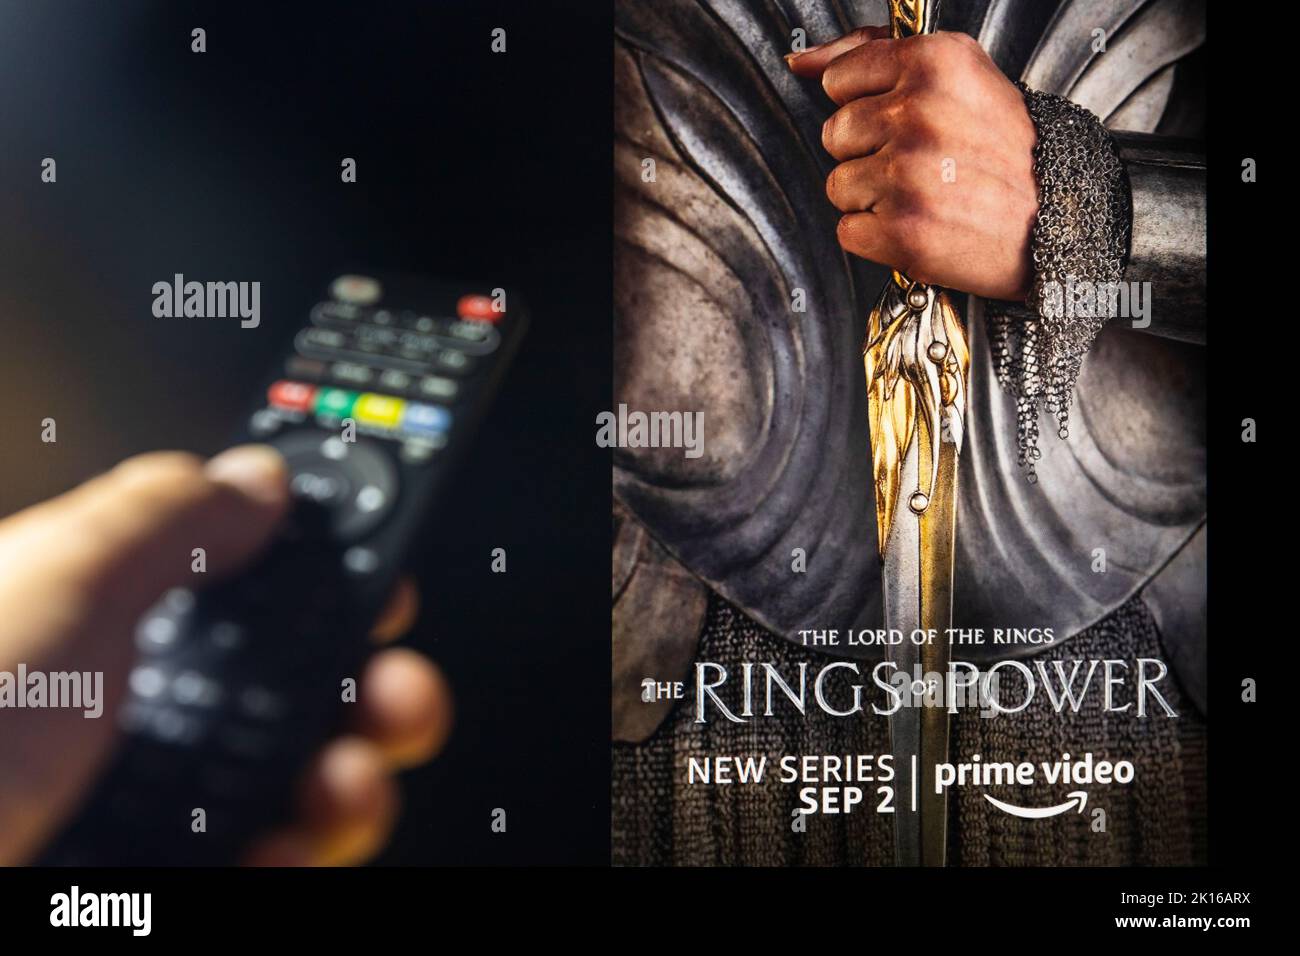 Belgrade, Serbia - September 12, 2022: The Lord of the Rings: The Rings of Power TV series on TV with remote control in hand. Story takes place thousa Stock Photo